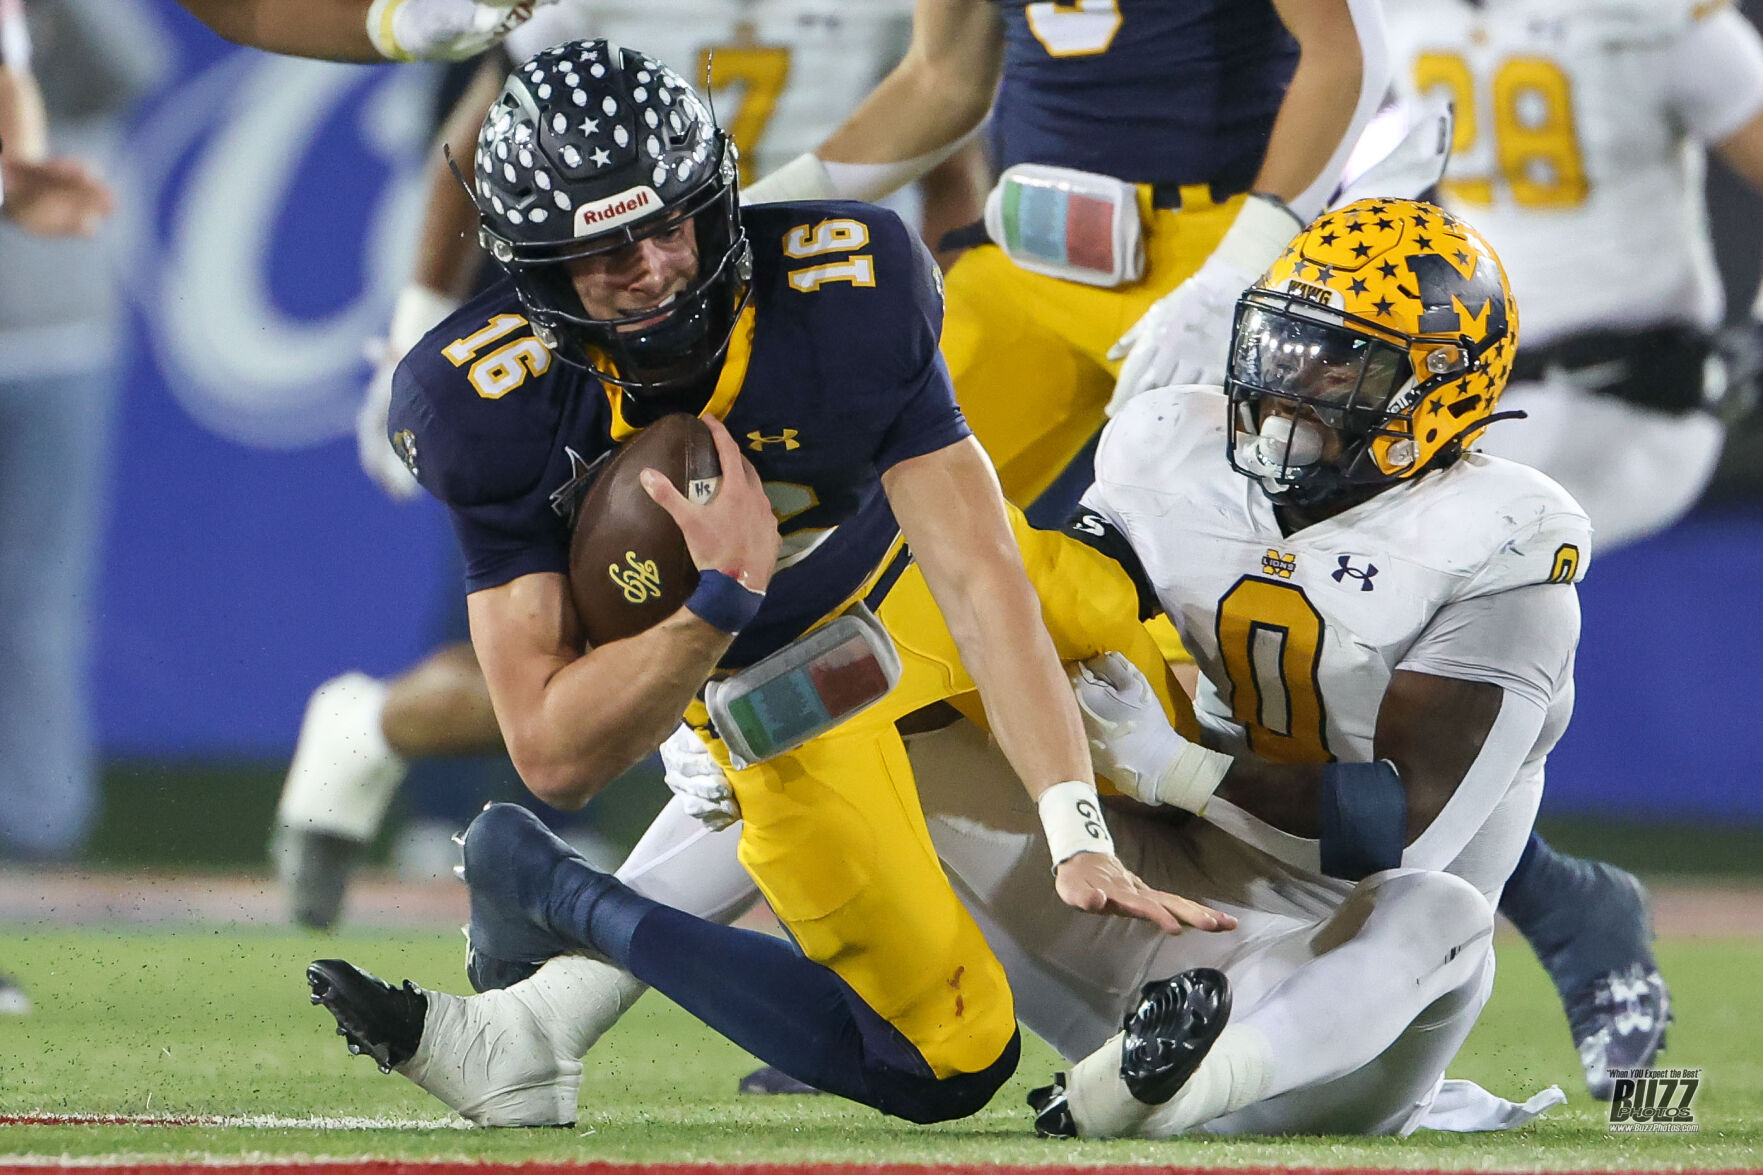 Highland Park stages a comeback to defeat McKinney in thrilling playoff game